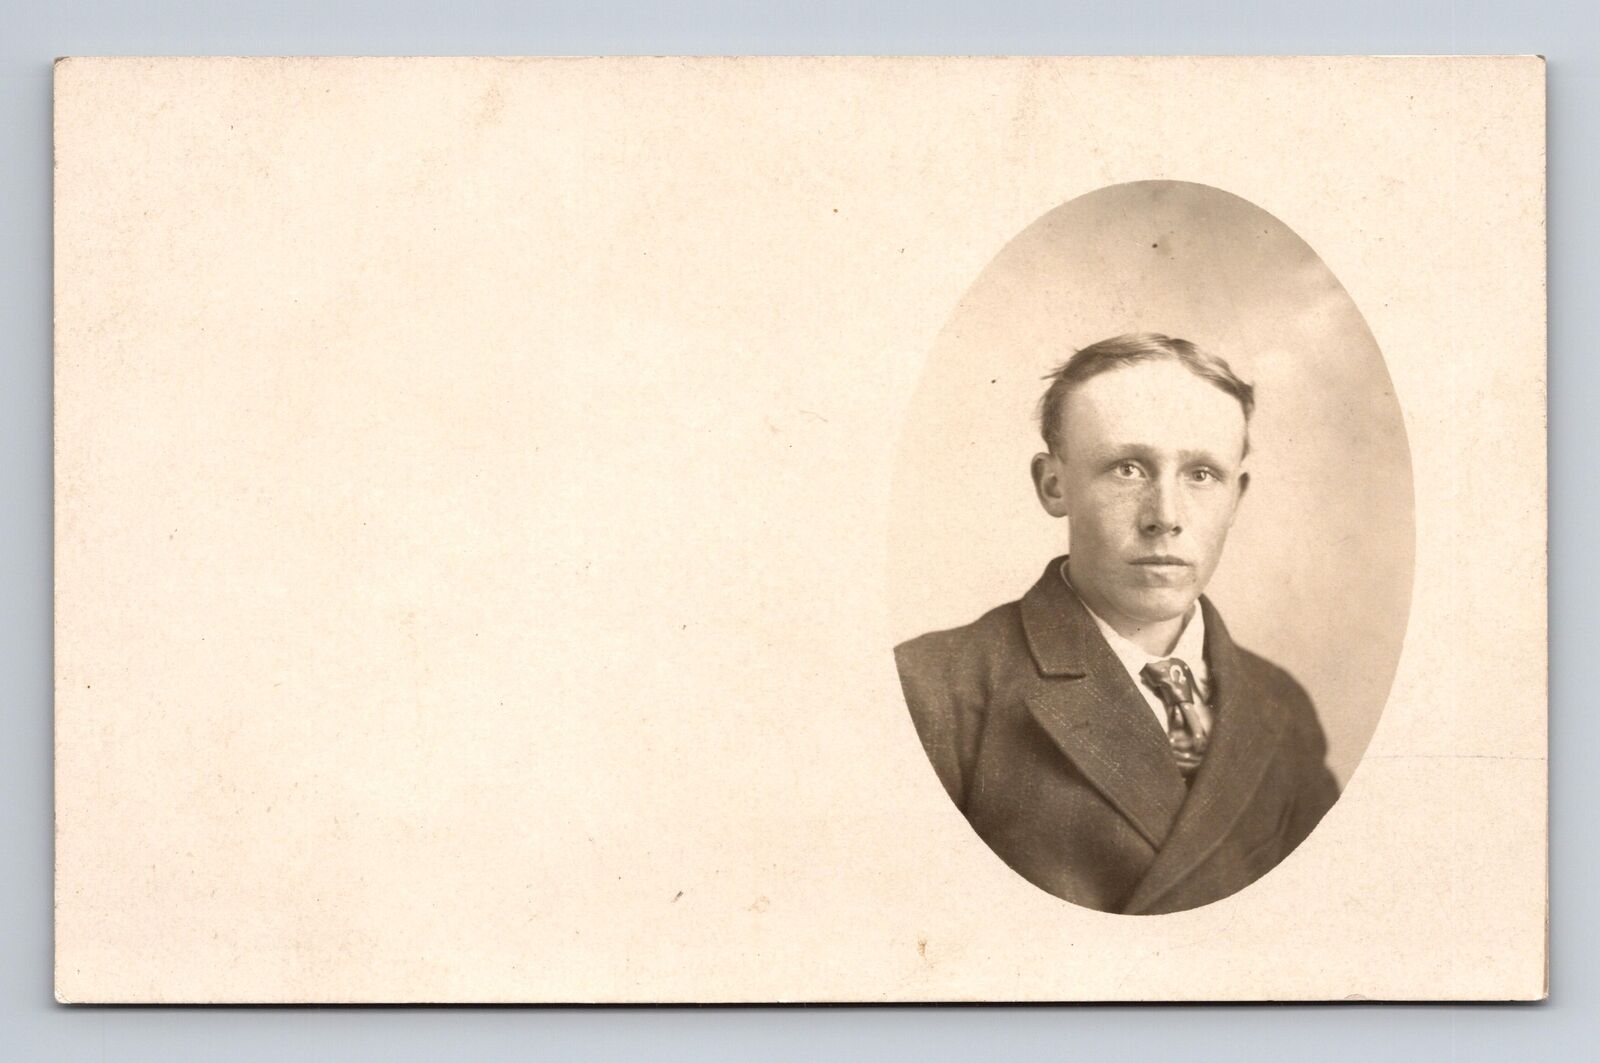 Cameo Portrait of a Young Man Freckles RPPC Postcard